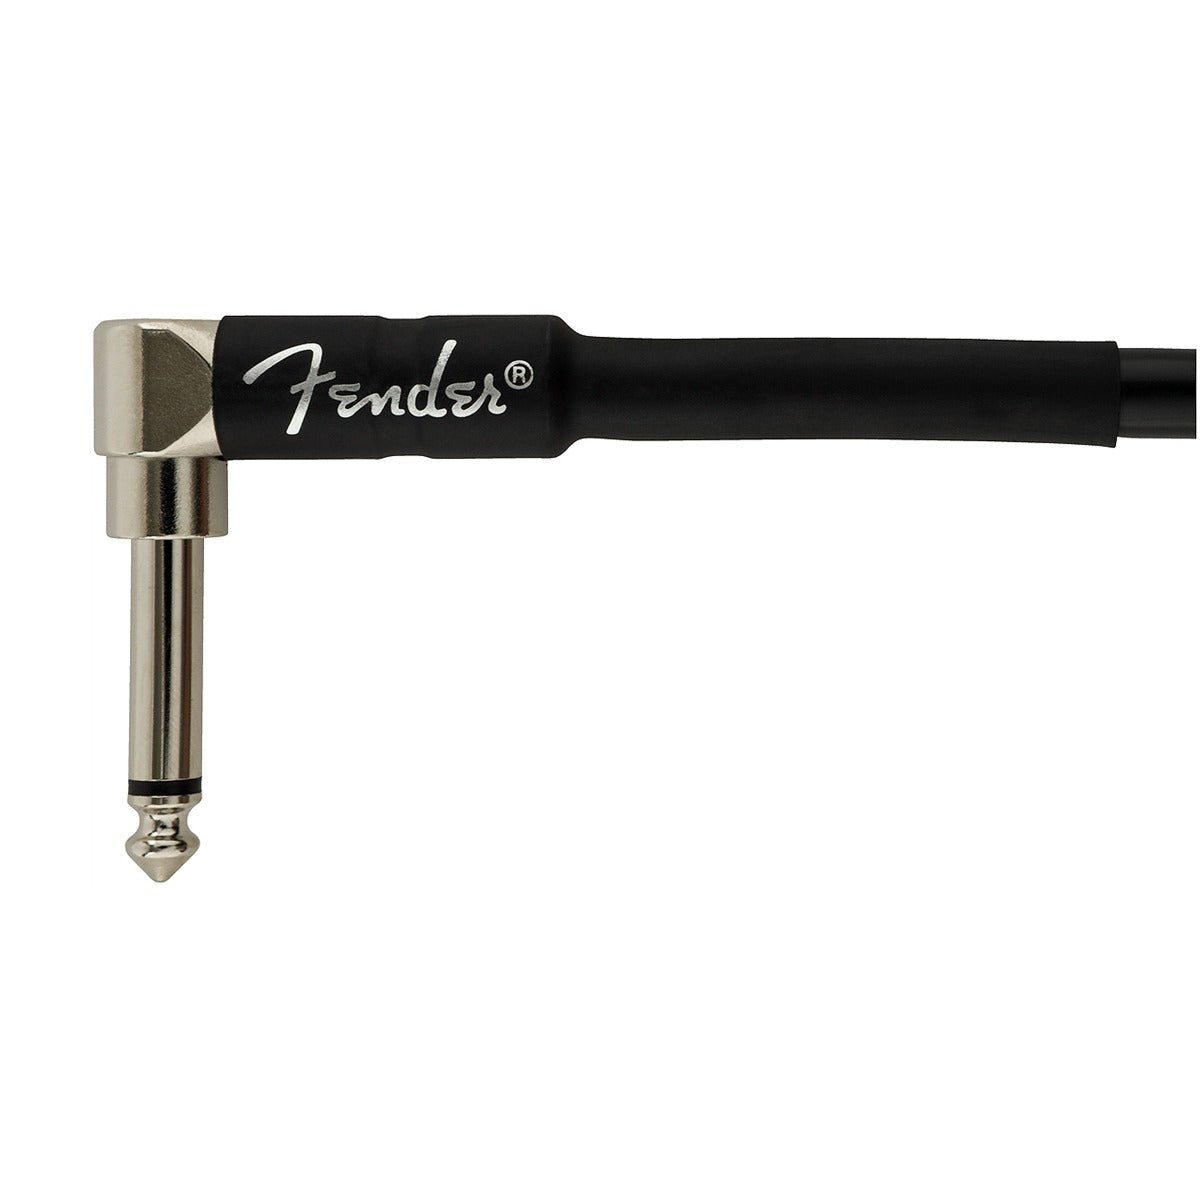 Fender Professional Series Right Angle Instrument Cable - 18.6'